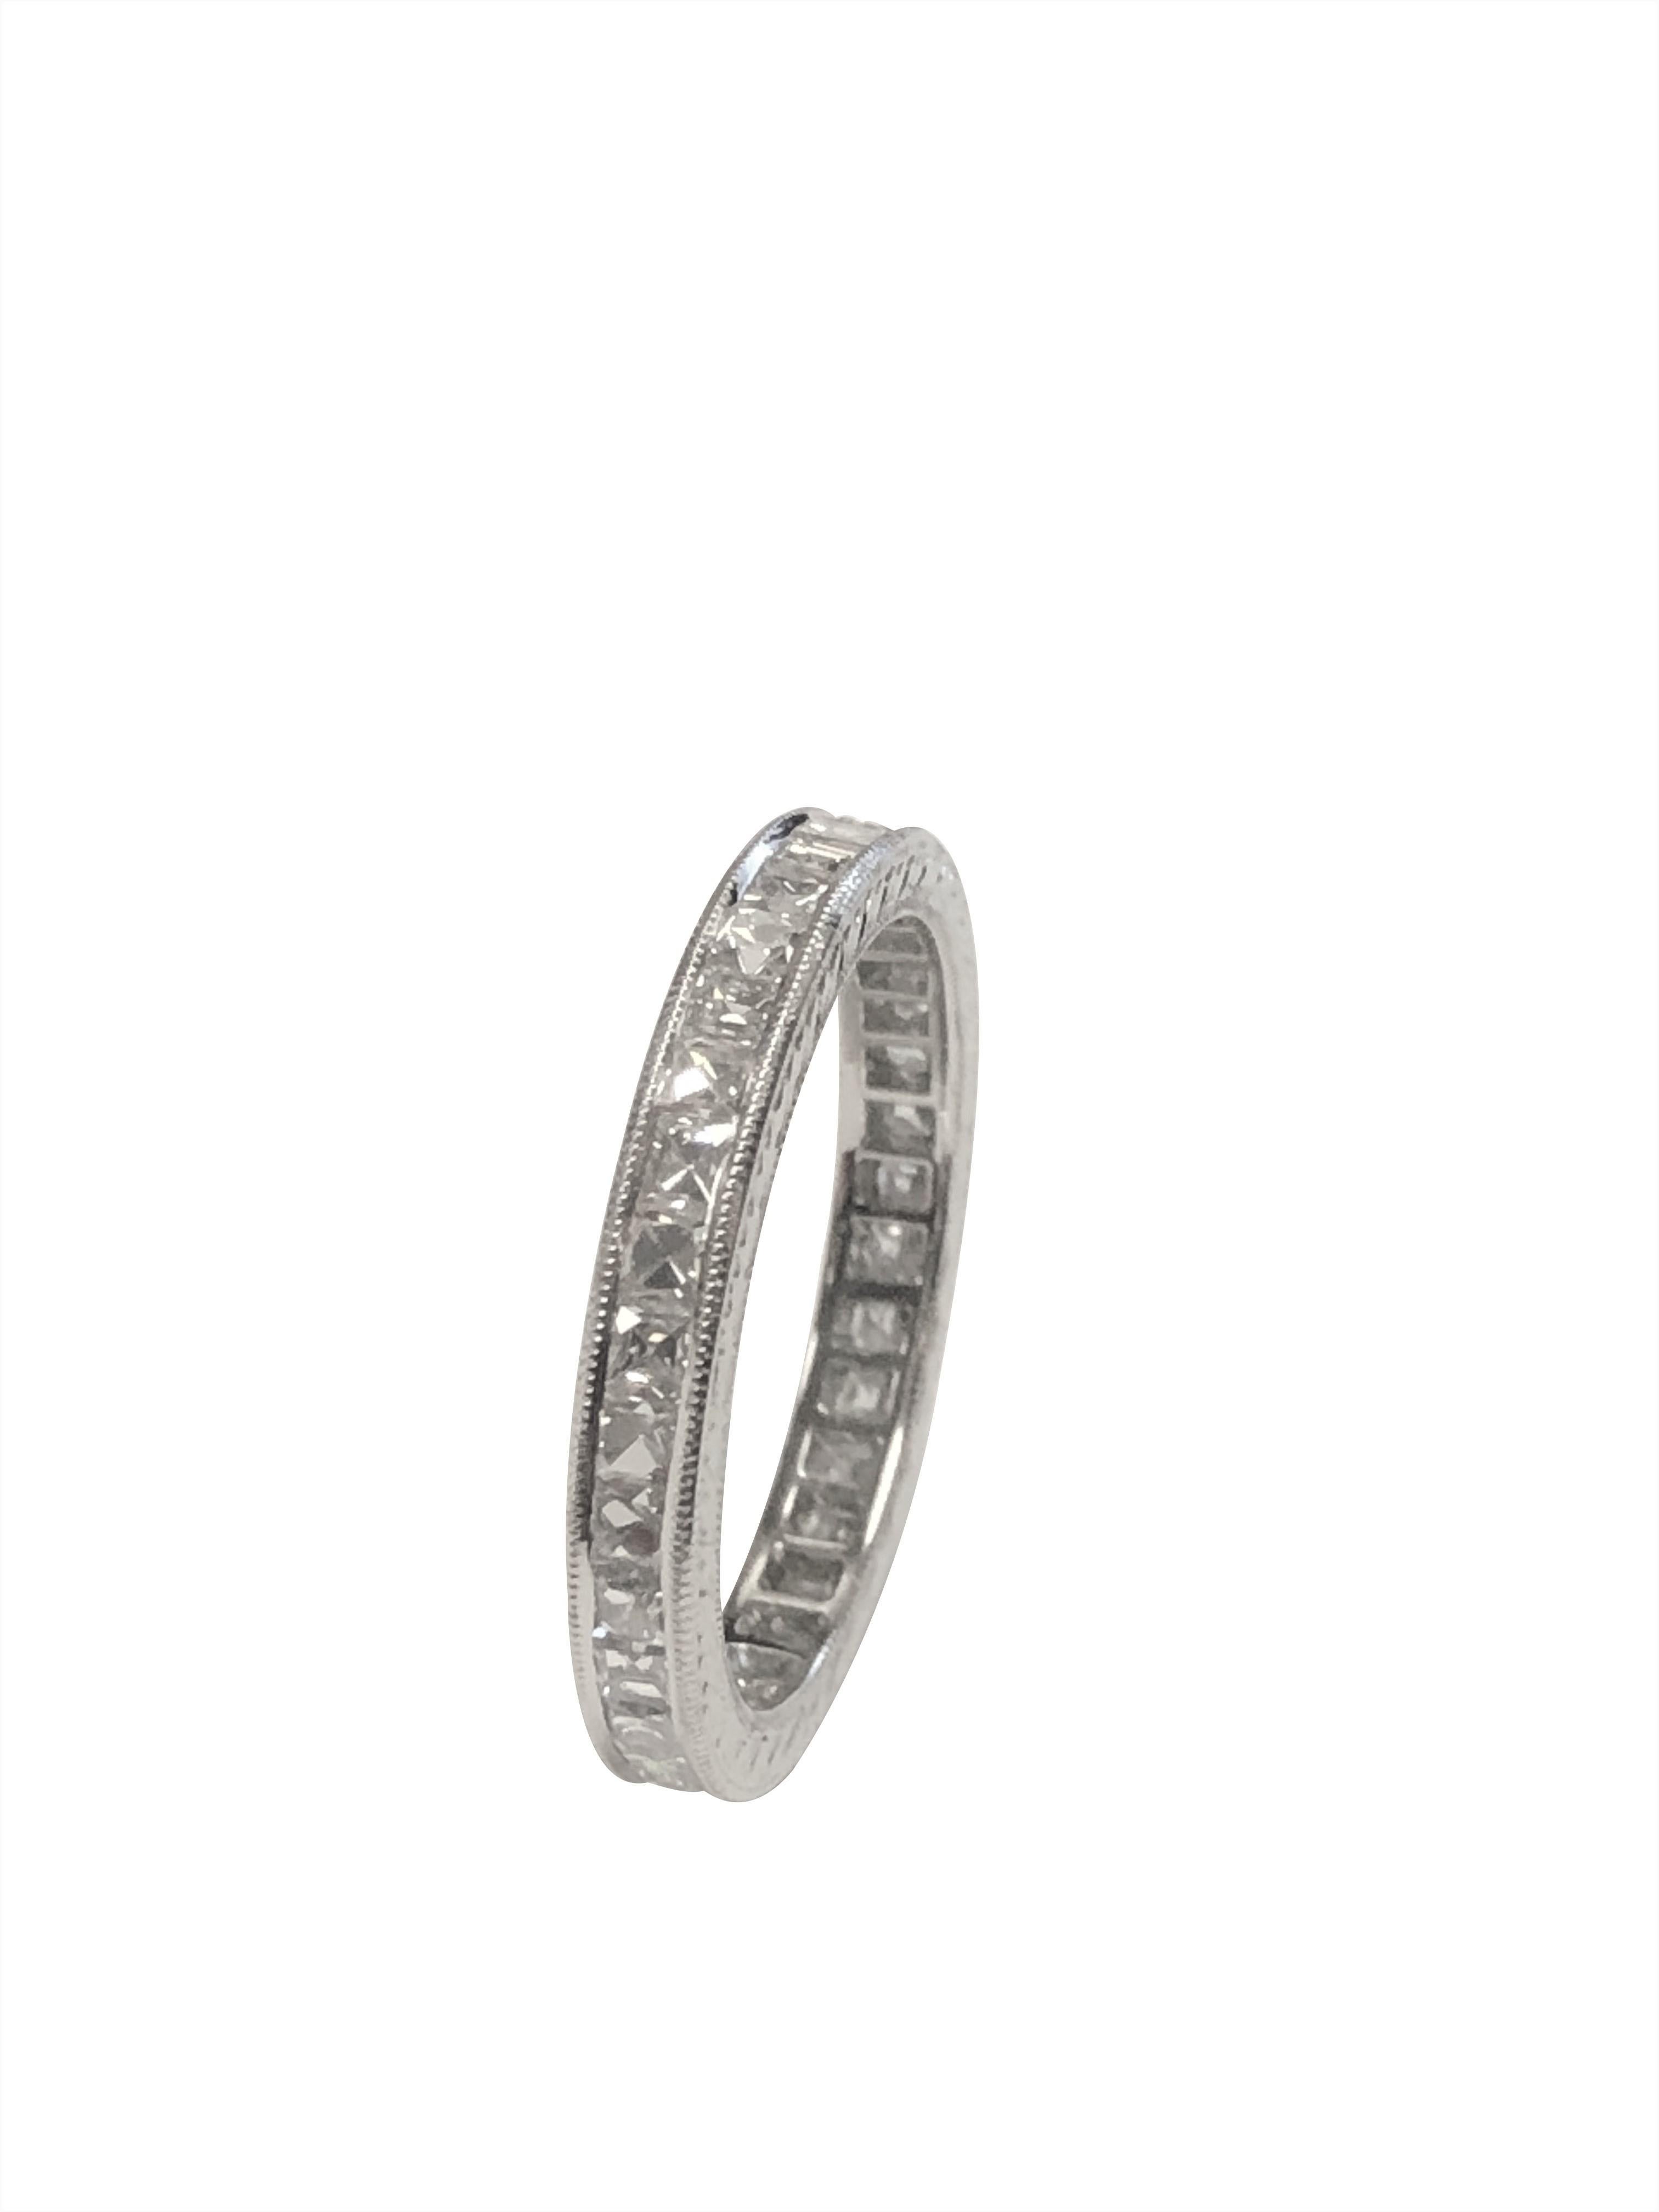 Circa 1920s Platinum Eternity Band Ring, measuring 2.5 M.M. wide and is a finger size 6, set with French Cut Diamonds totaling 1.25 Carats. The Ring was recently restored including resetting of the channel, re Milgrain and re engraving the design